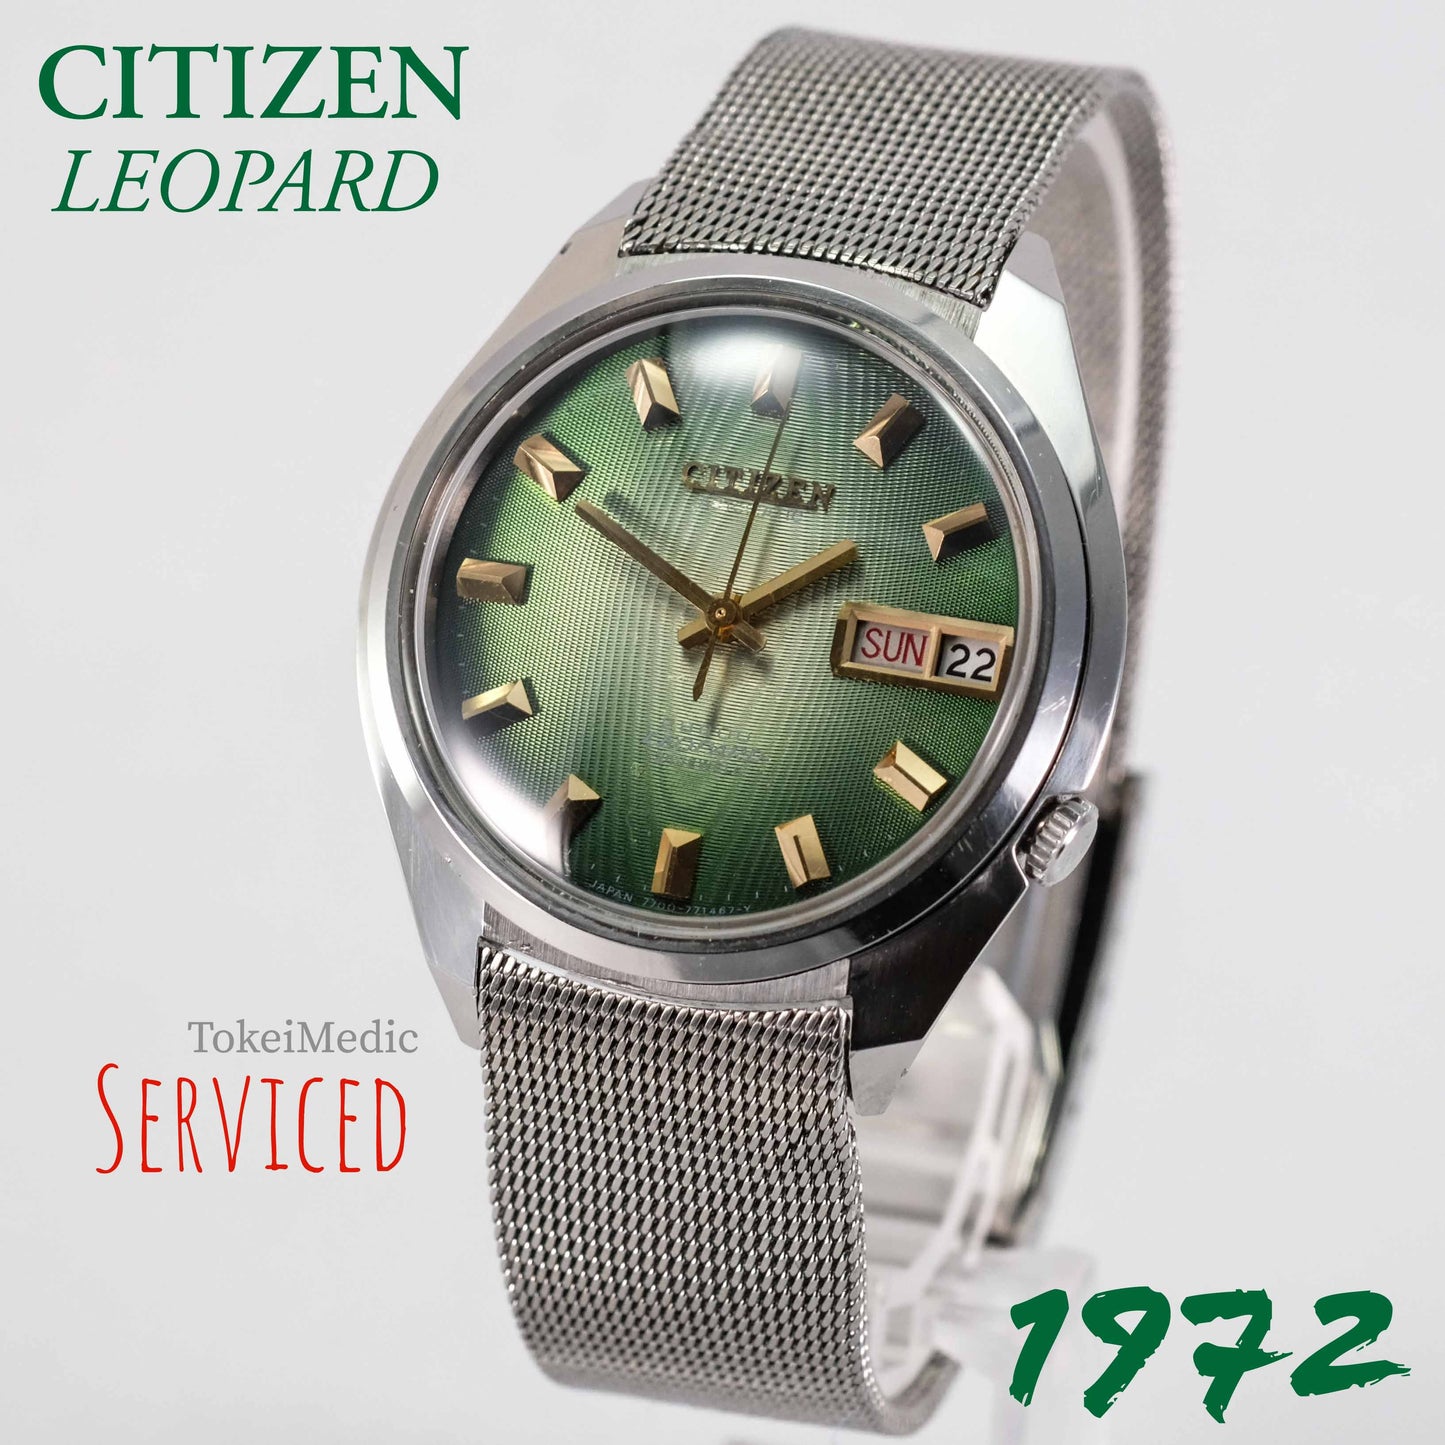 Reserved! 1972 Citizen 28800 Leopard 4-770382-Y